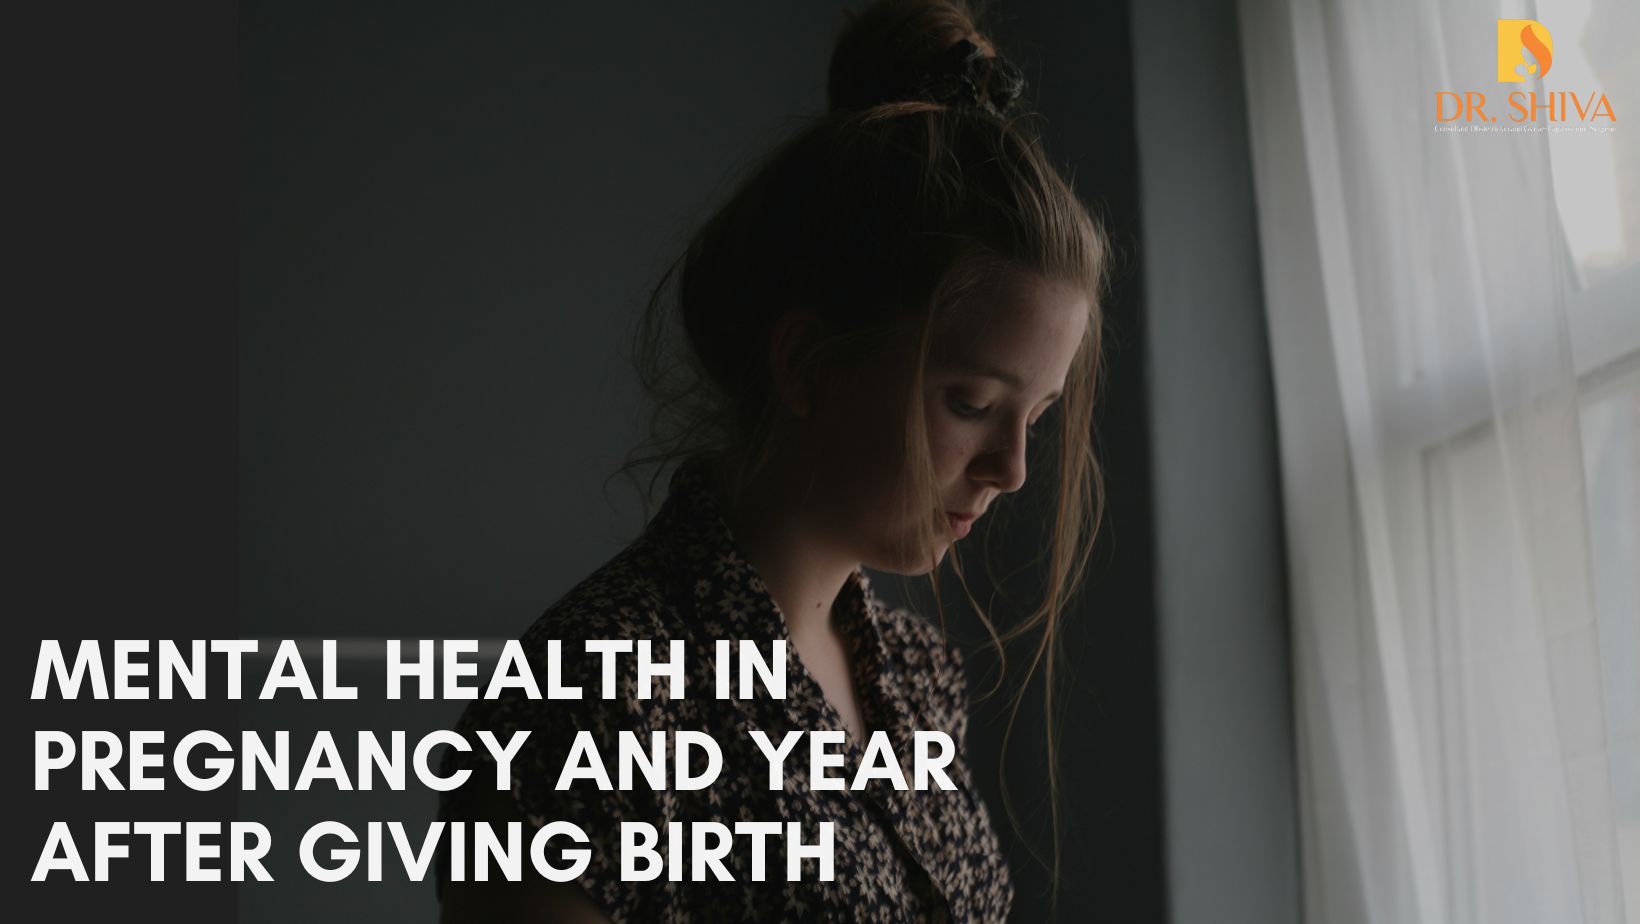 Mental health during pregnancy and year after giving birth